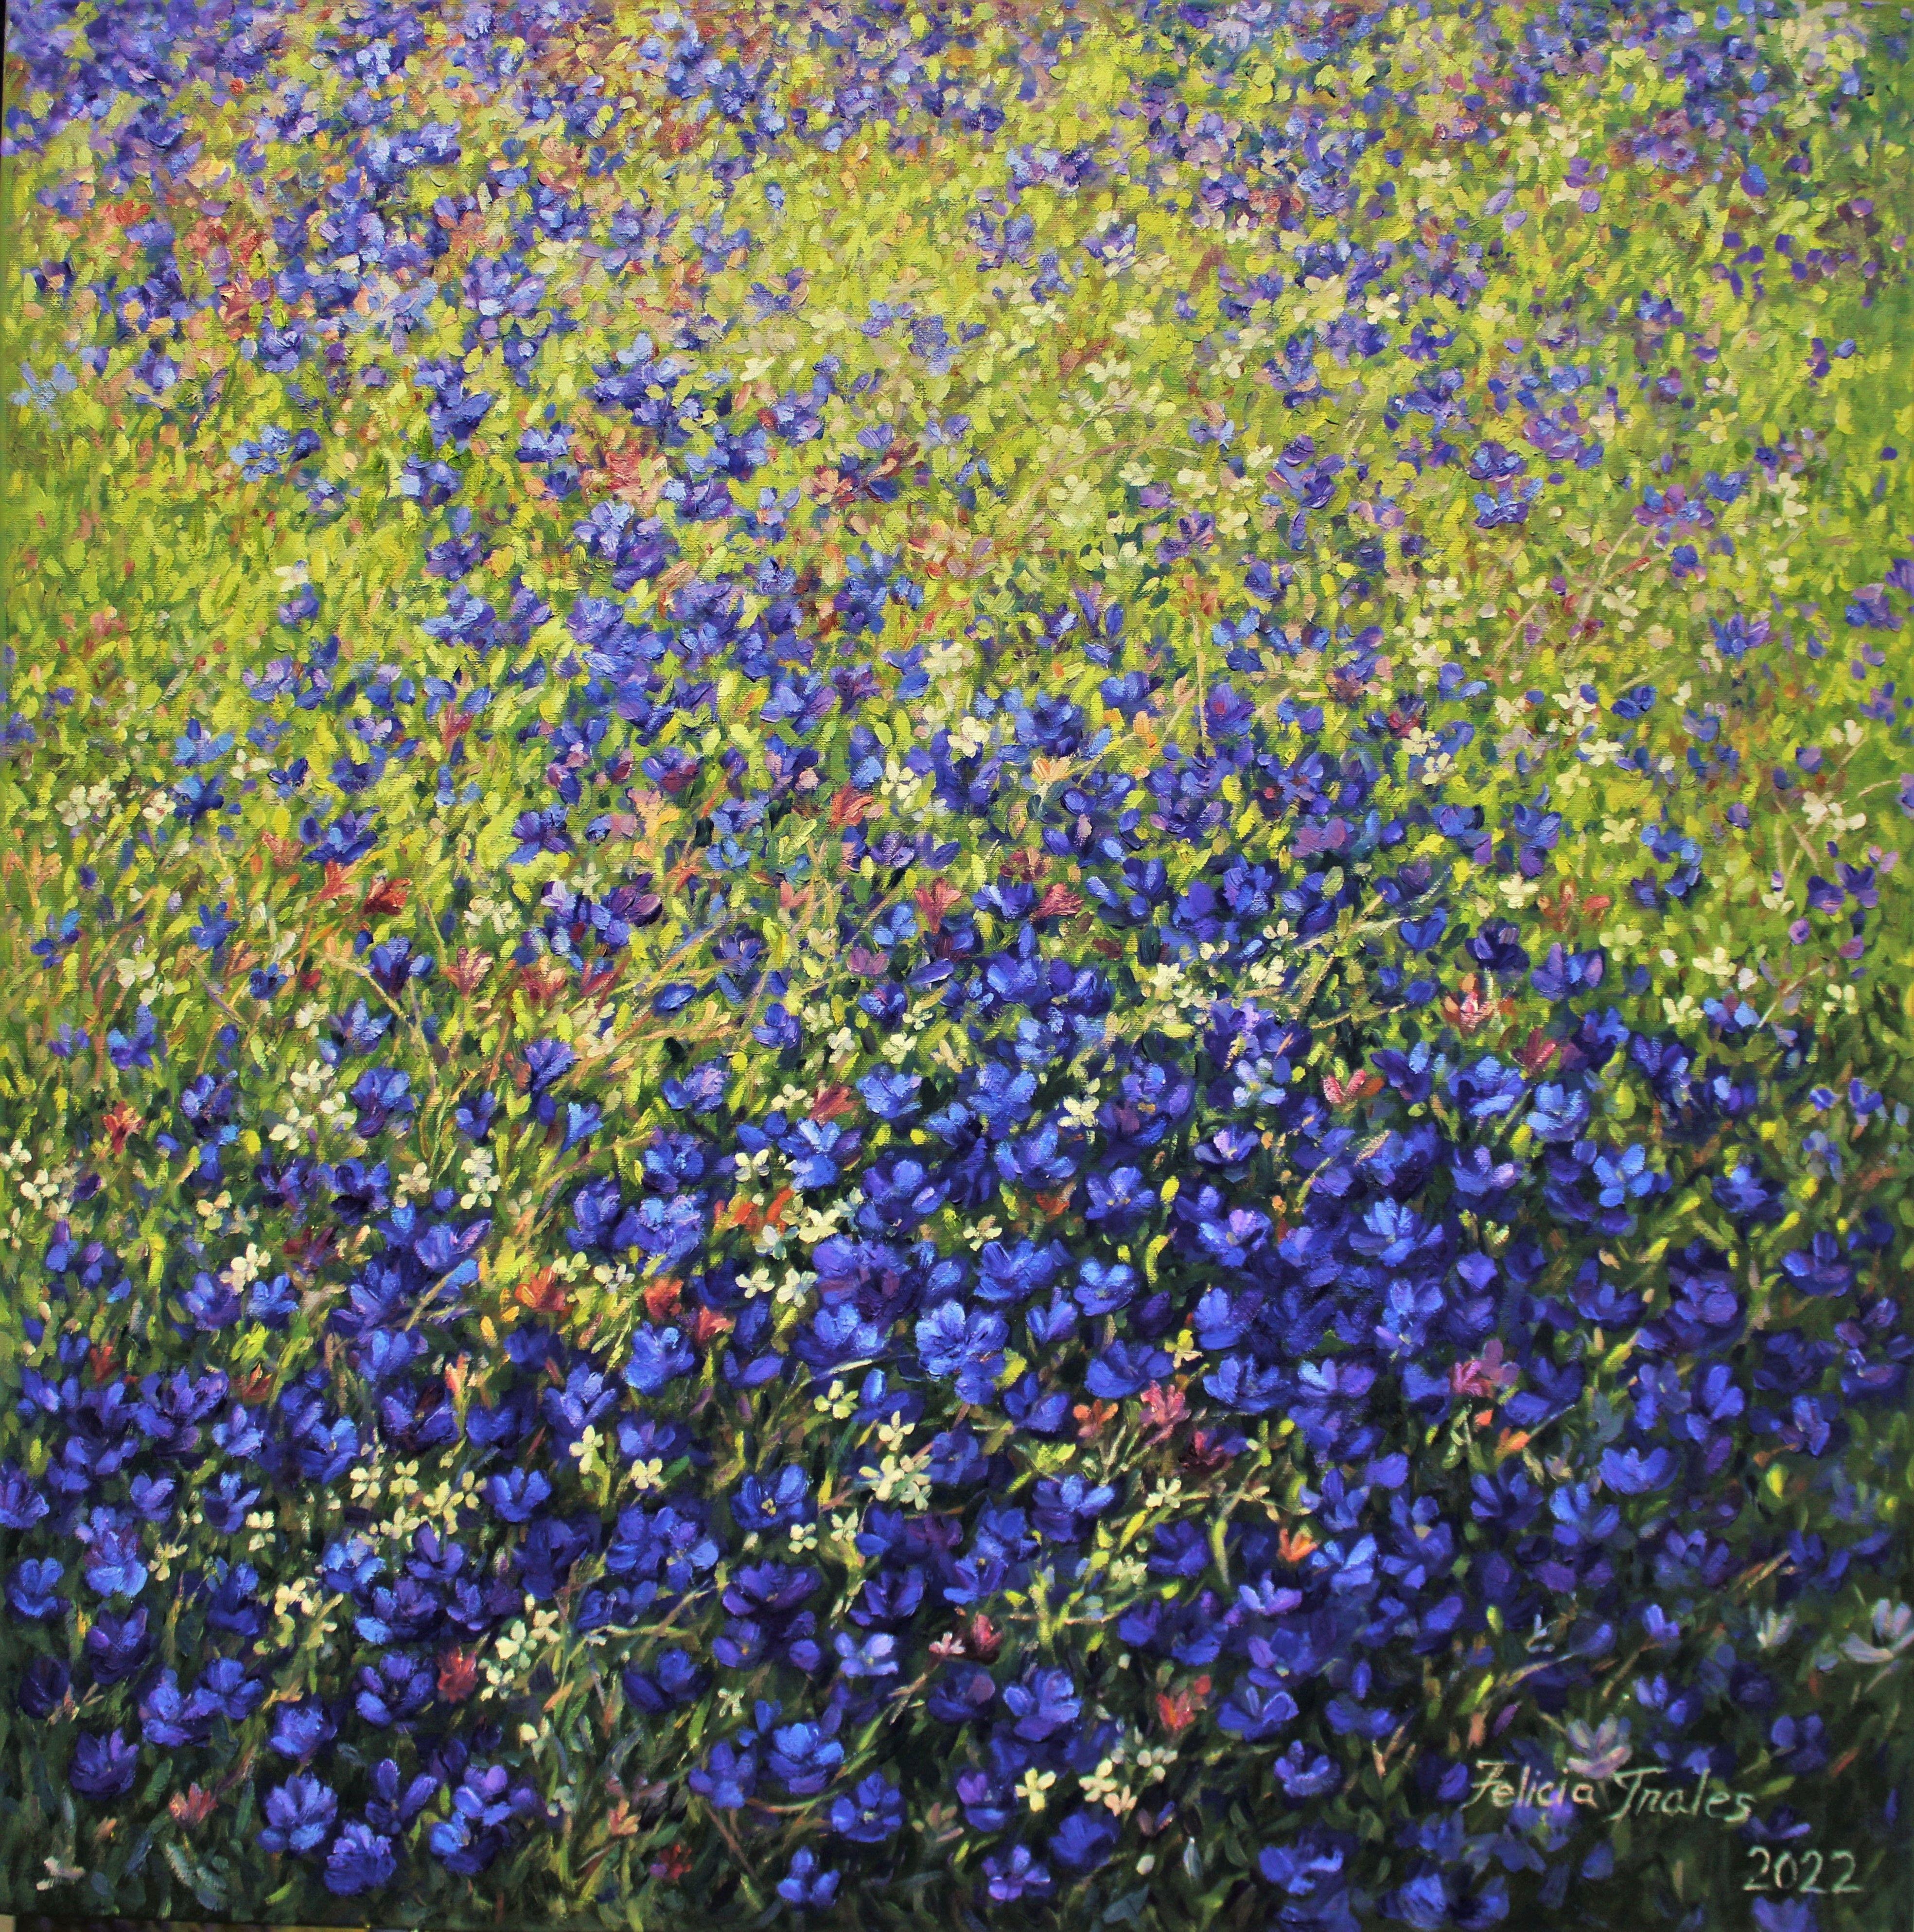 My painting is about spring, spring is about flowers, strong colors and joy :: Painting :: Impressionist :: This piece comes with an official certificate of authenticity signed by the artist :: Ready to Hang: Yes :: Signed: Yes :: Signature